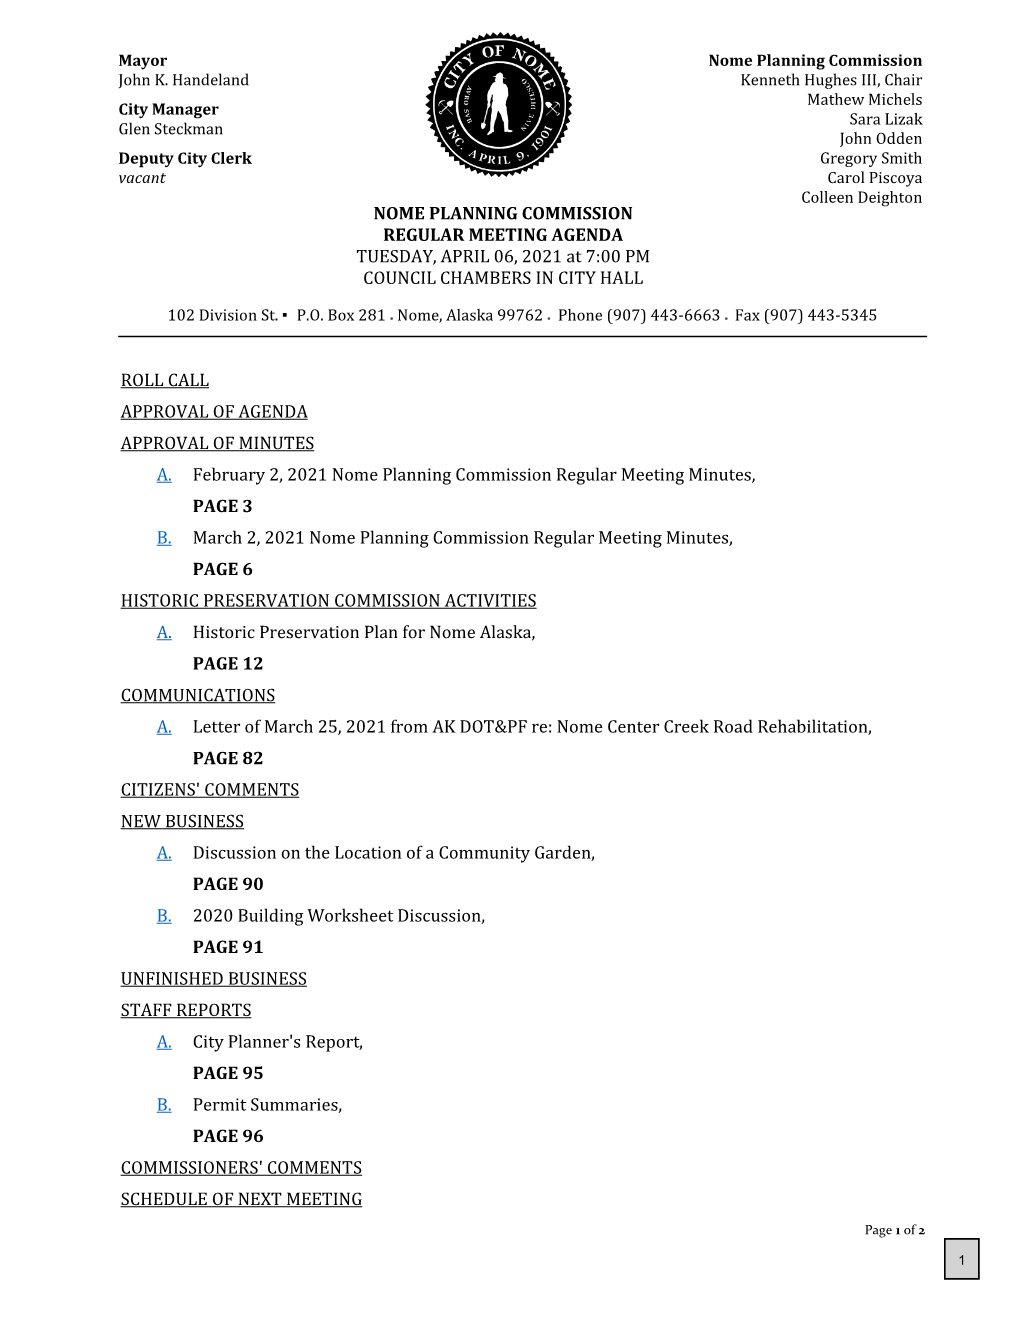 NOME PLANNING COMMISSION REGULAR MEETING AGENDA TUESDAY, APRIL 06, 2021 at 7:00 PM COUNCIL CHAMBERS in CITY HALL